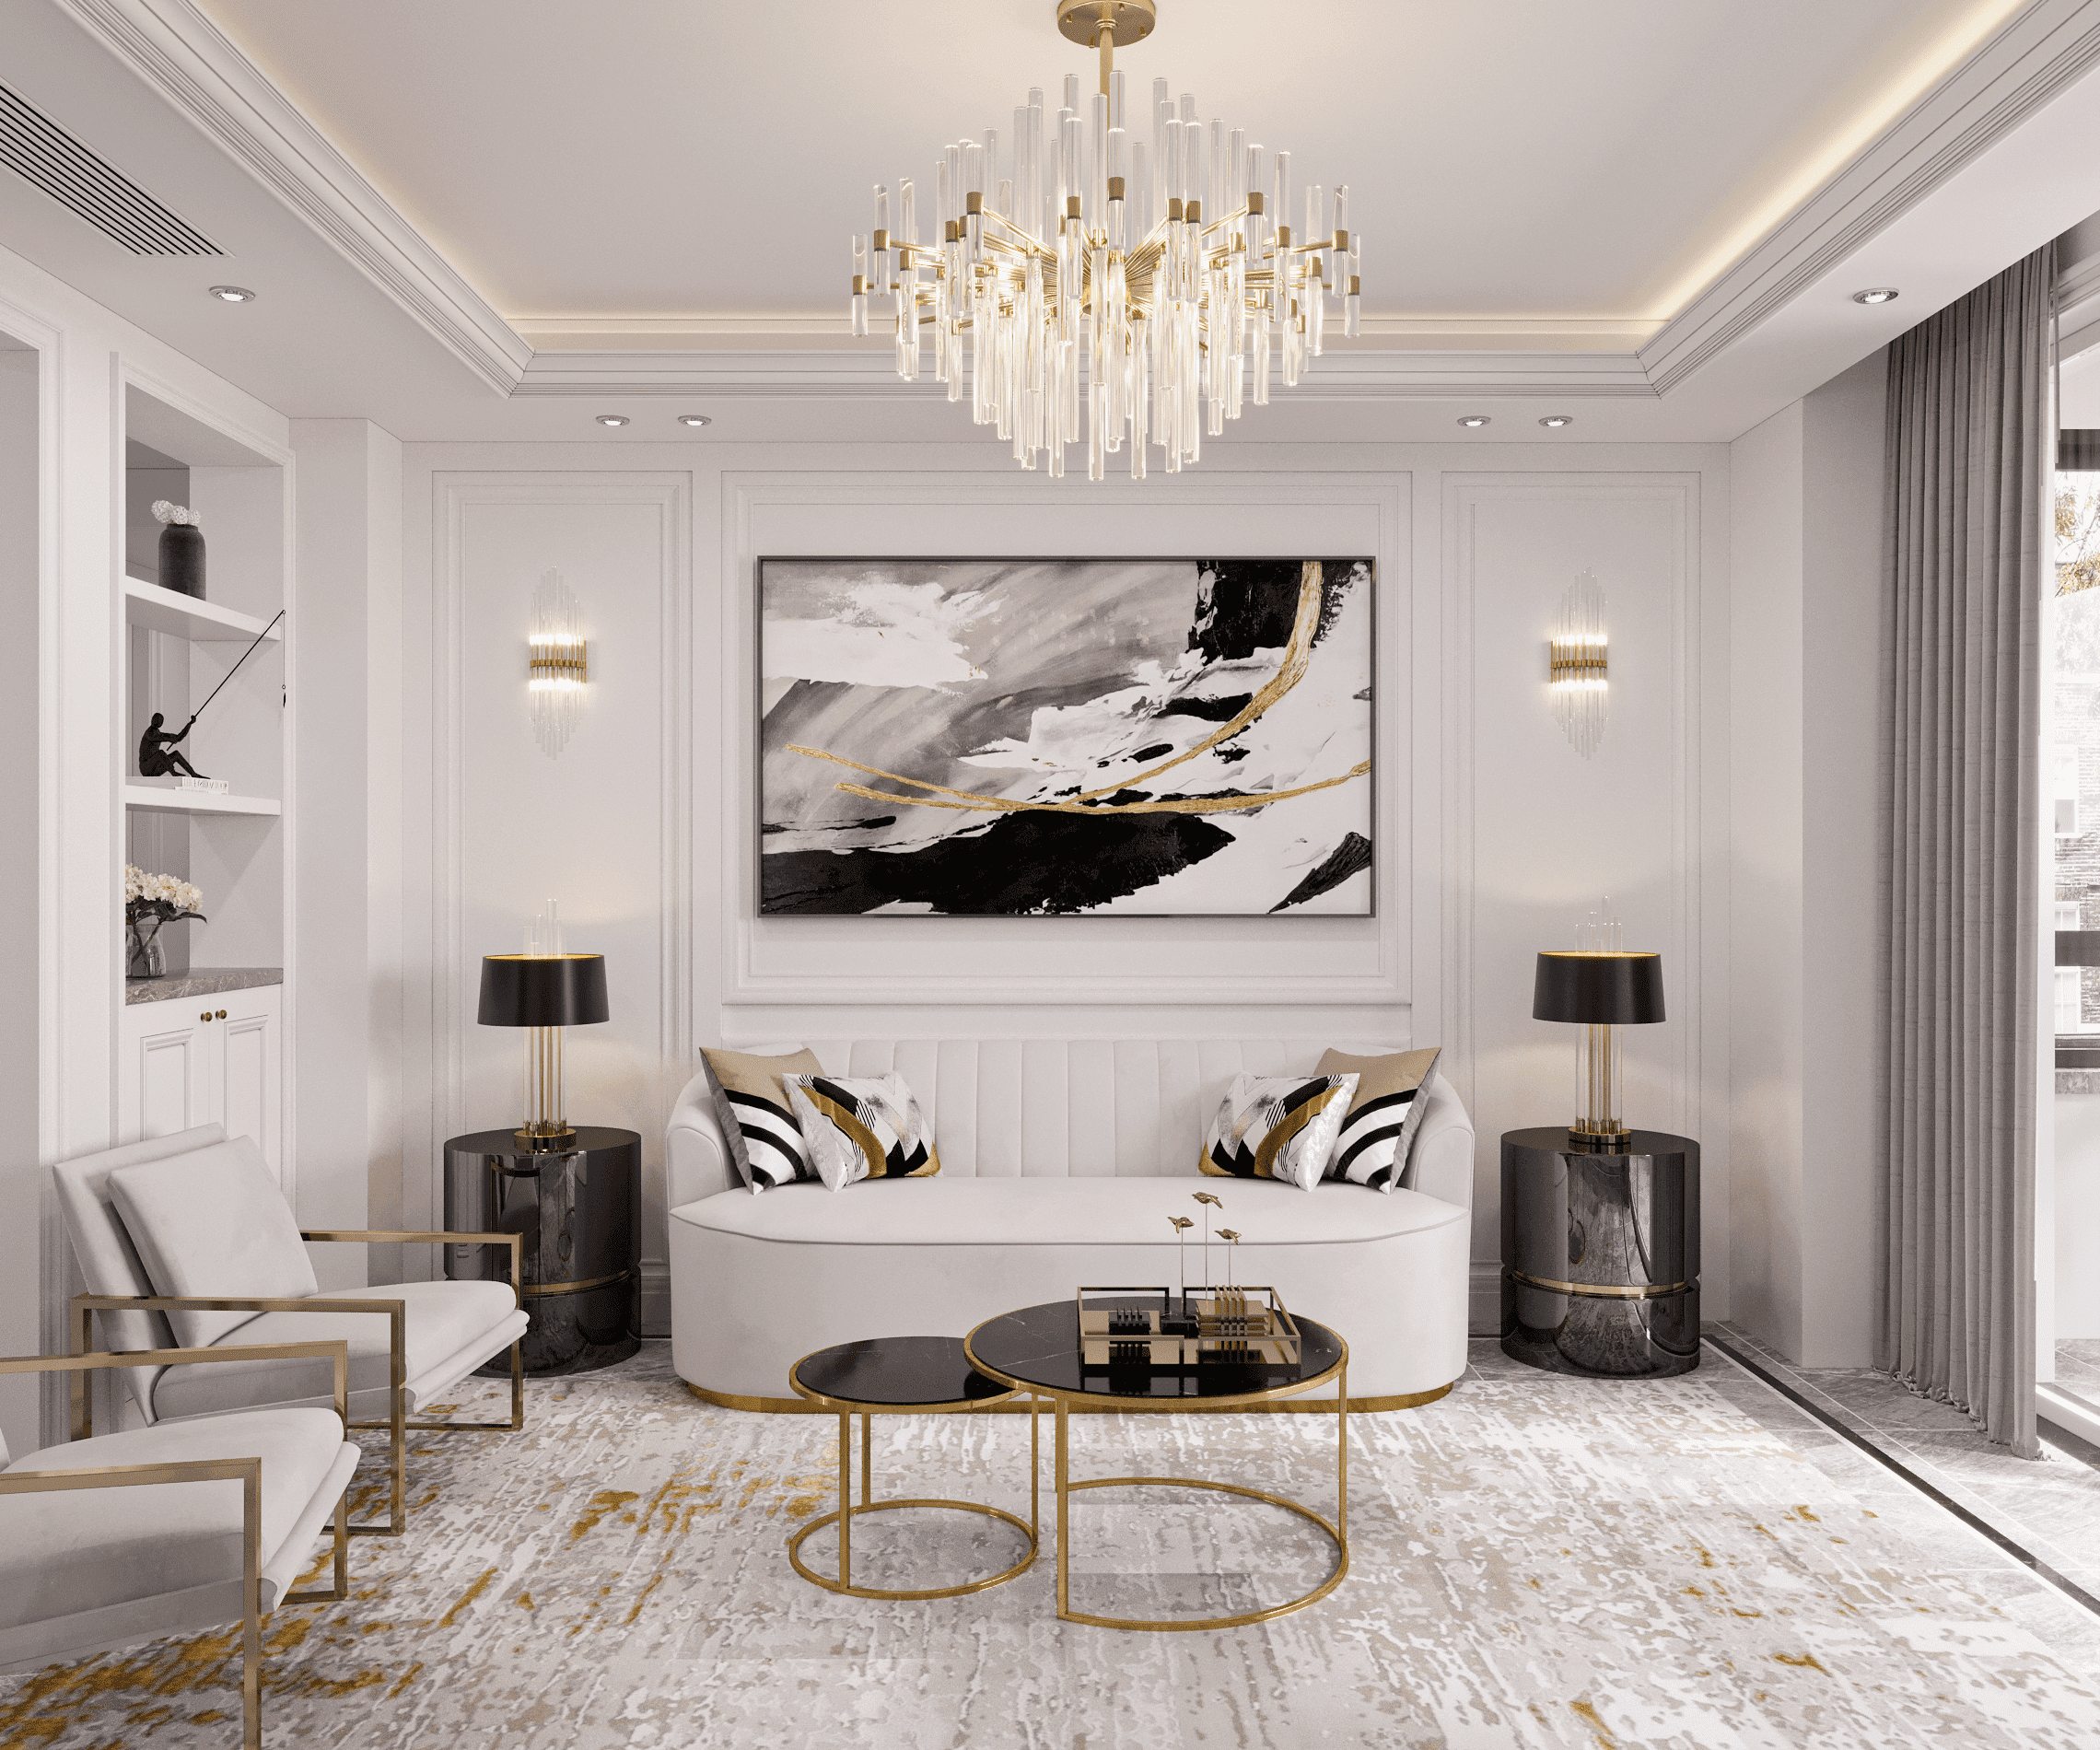 A Living Area With Luxurious Interior Design